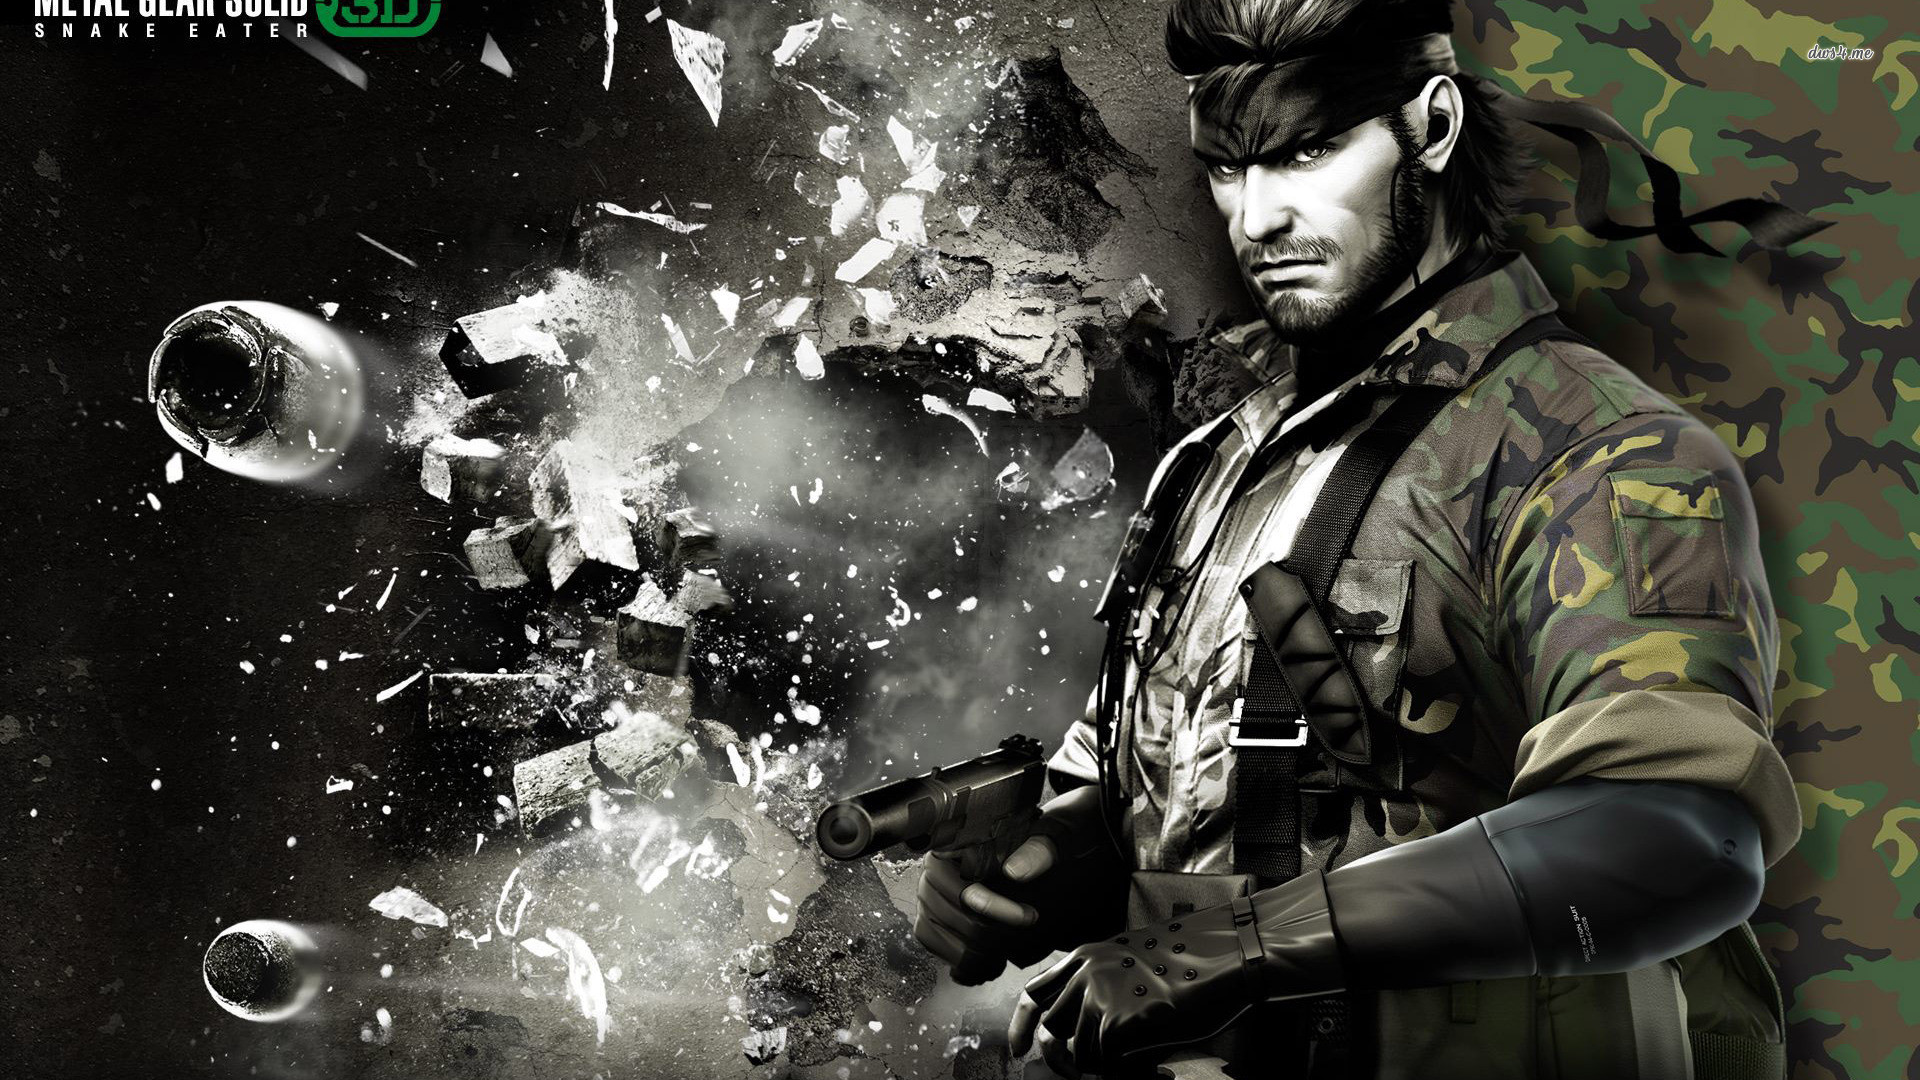 mgs 3 snake eater pc